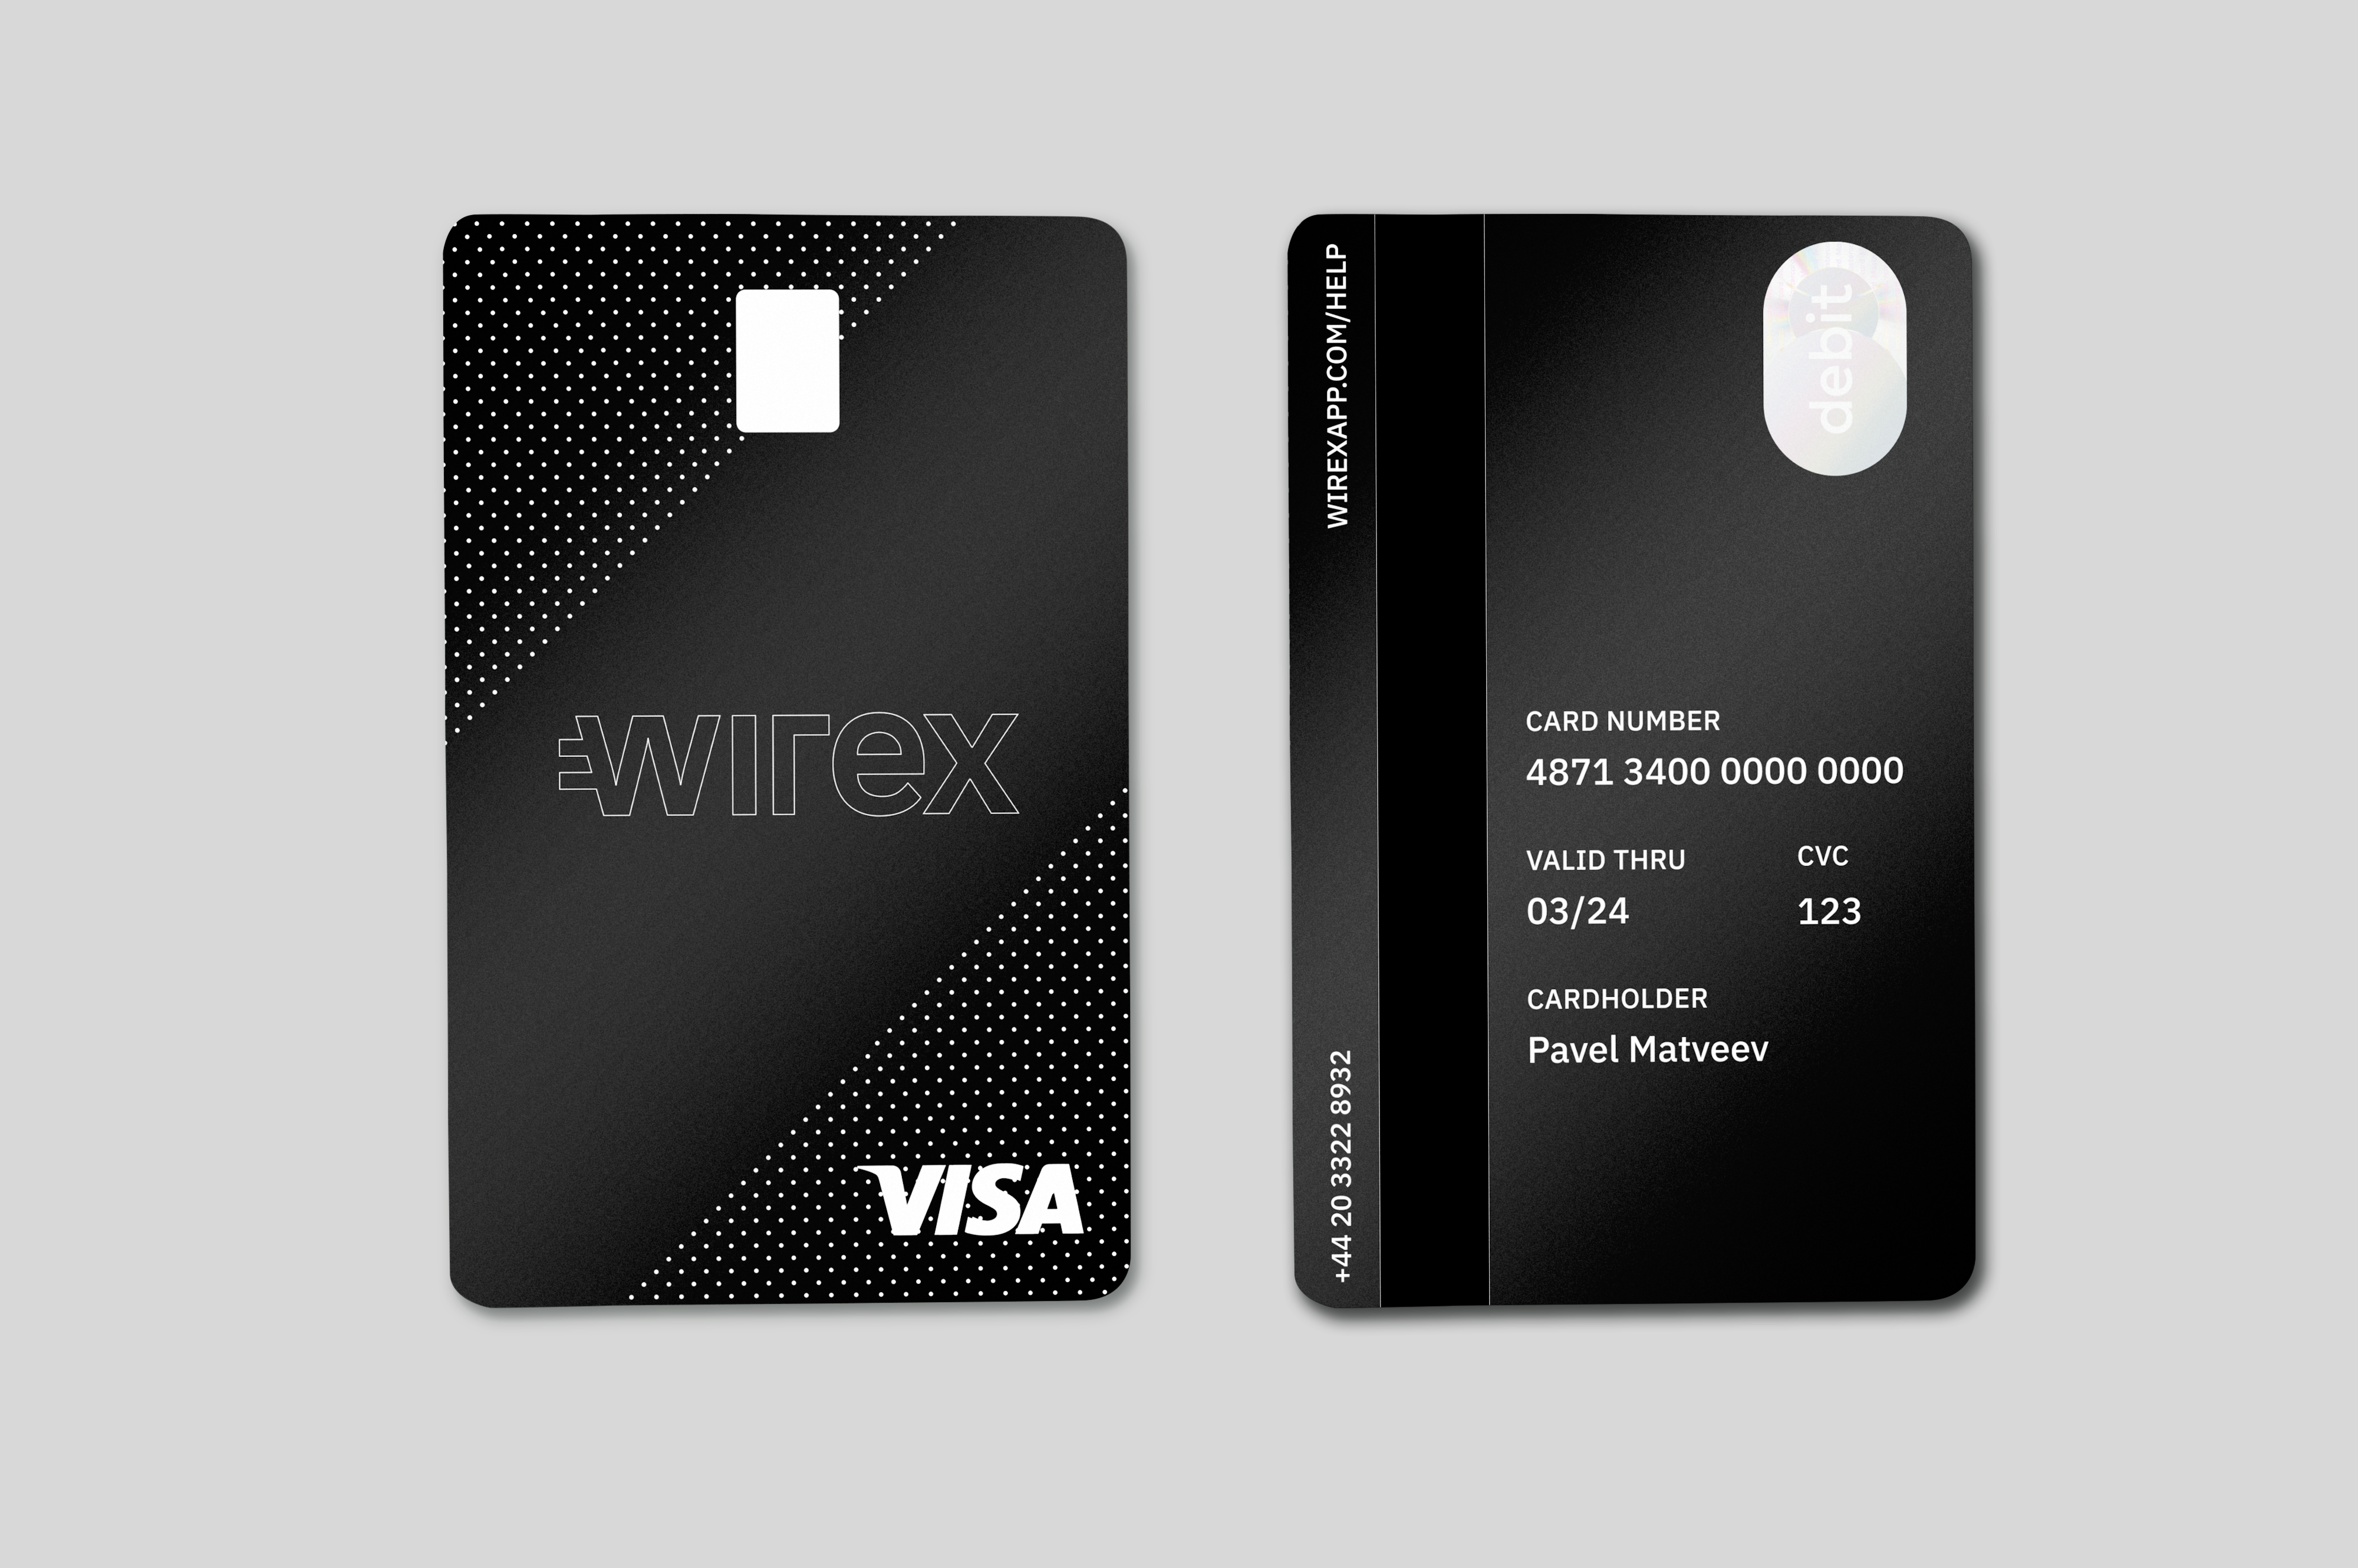 Wirex Card Review Fees & Limits - hi